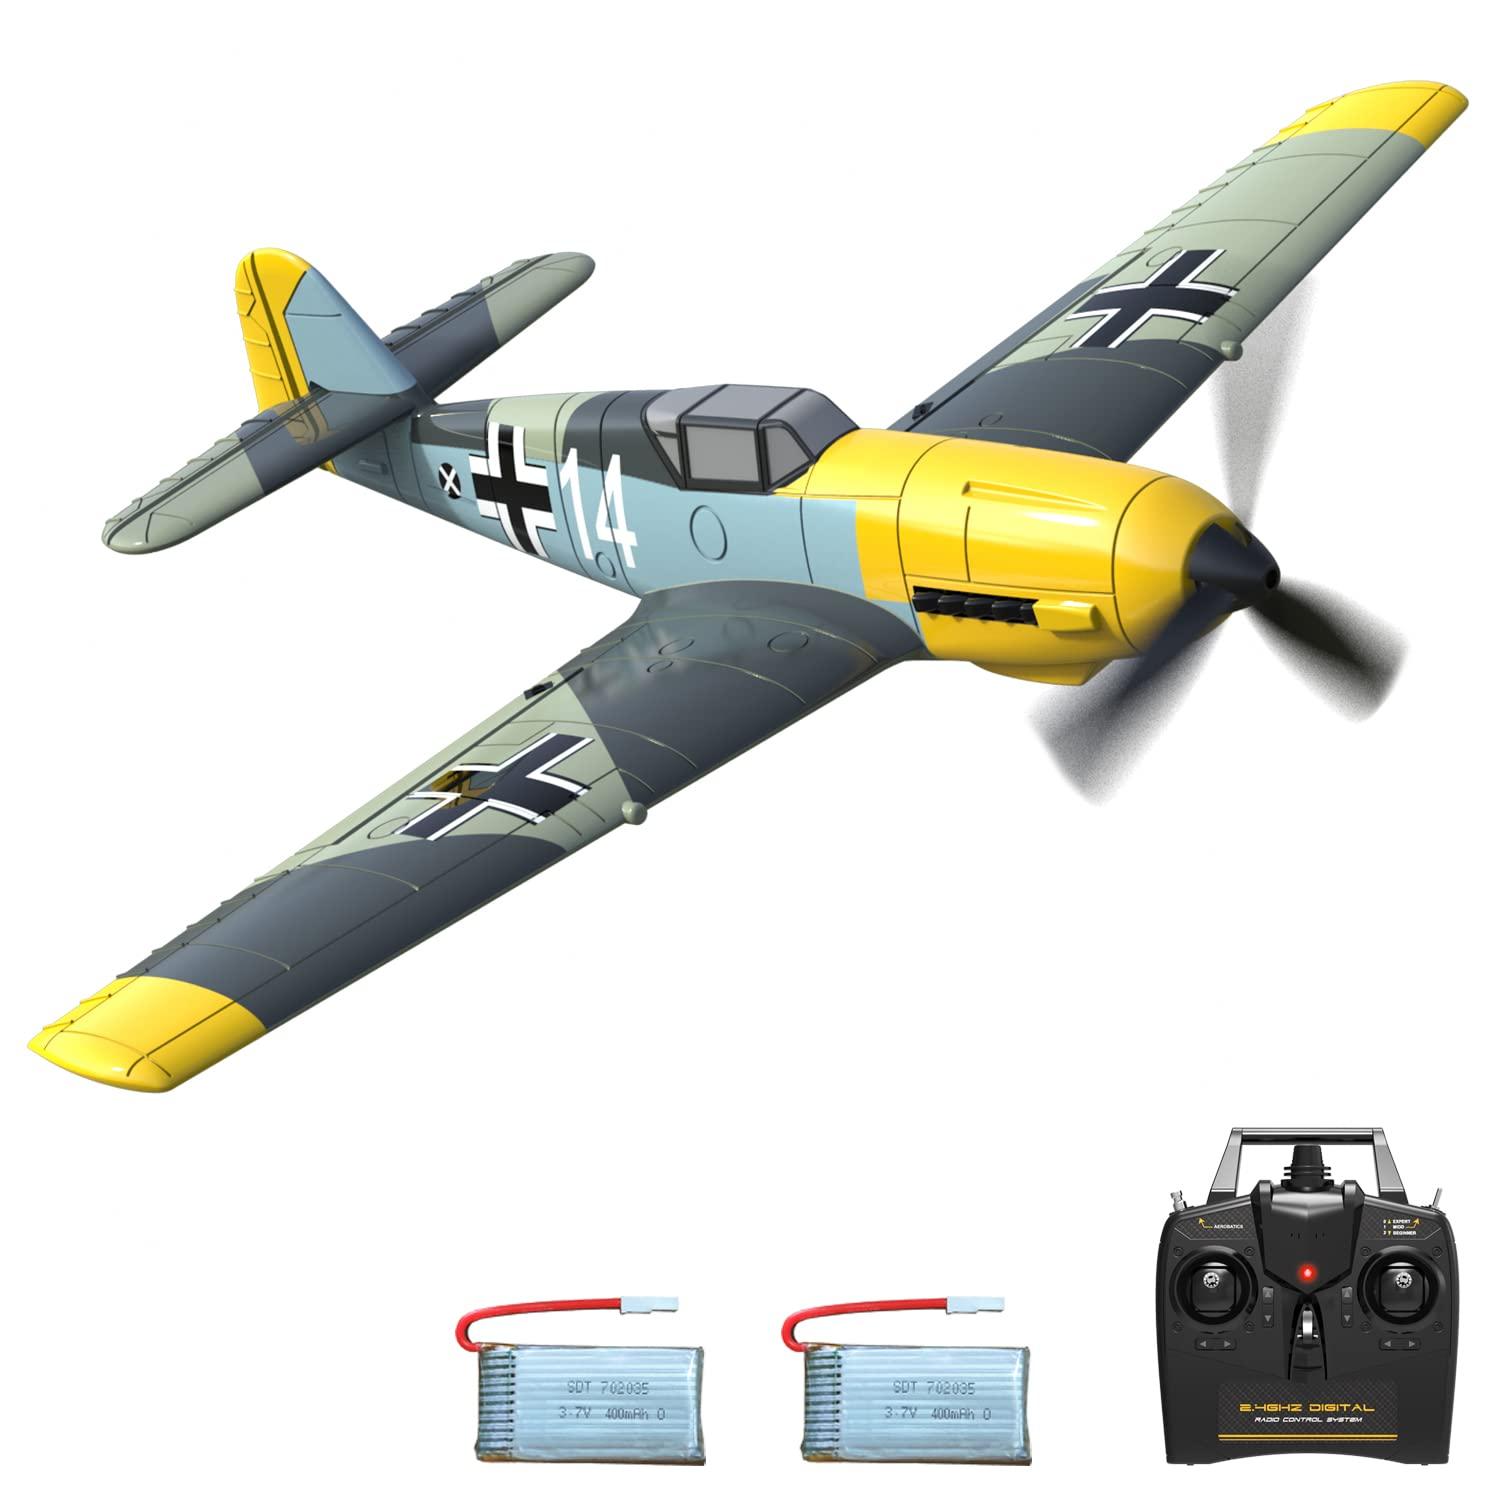 Rc Airplanes For Sale: Where to Buy RC Airplanes: Online and Specialty Stores